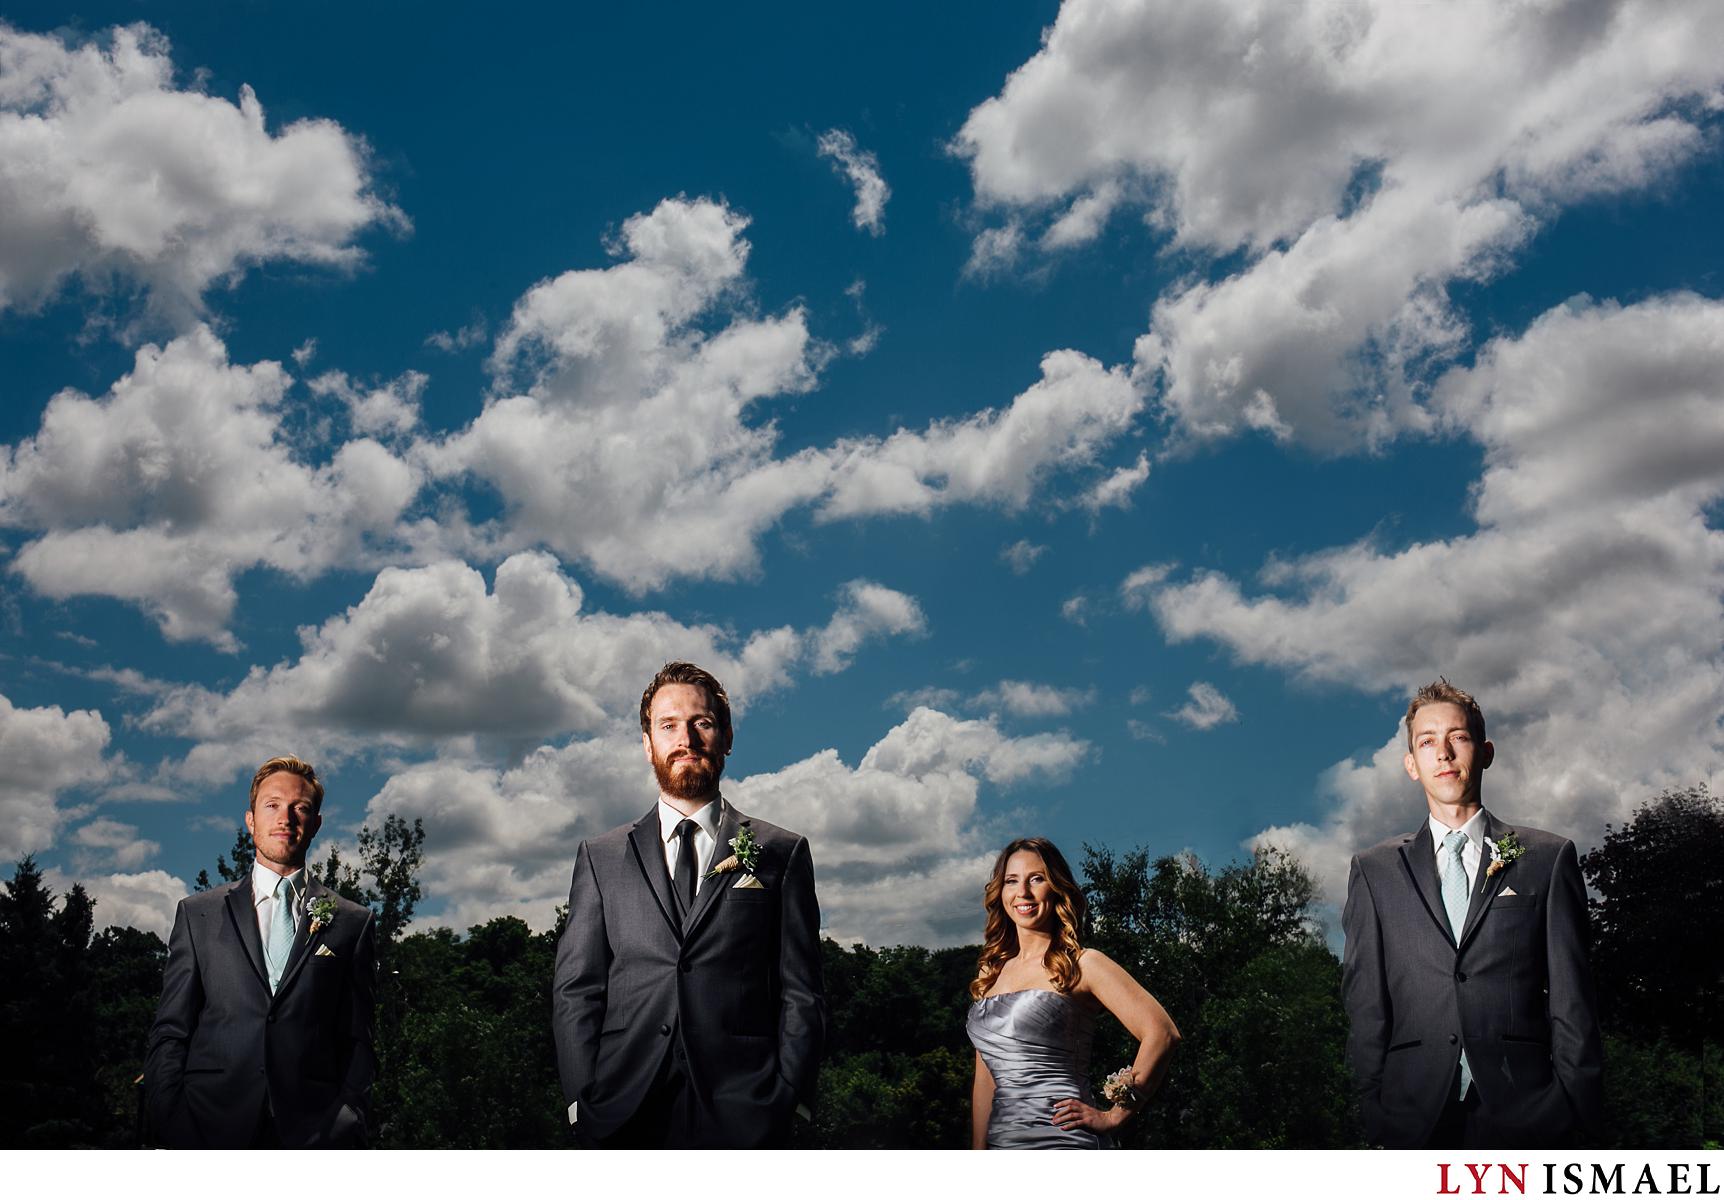 Flash composite portraiture featuring the groom and his groomsmen at a Waterloo Region wedding.